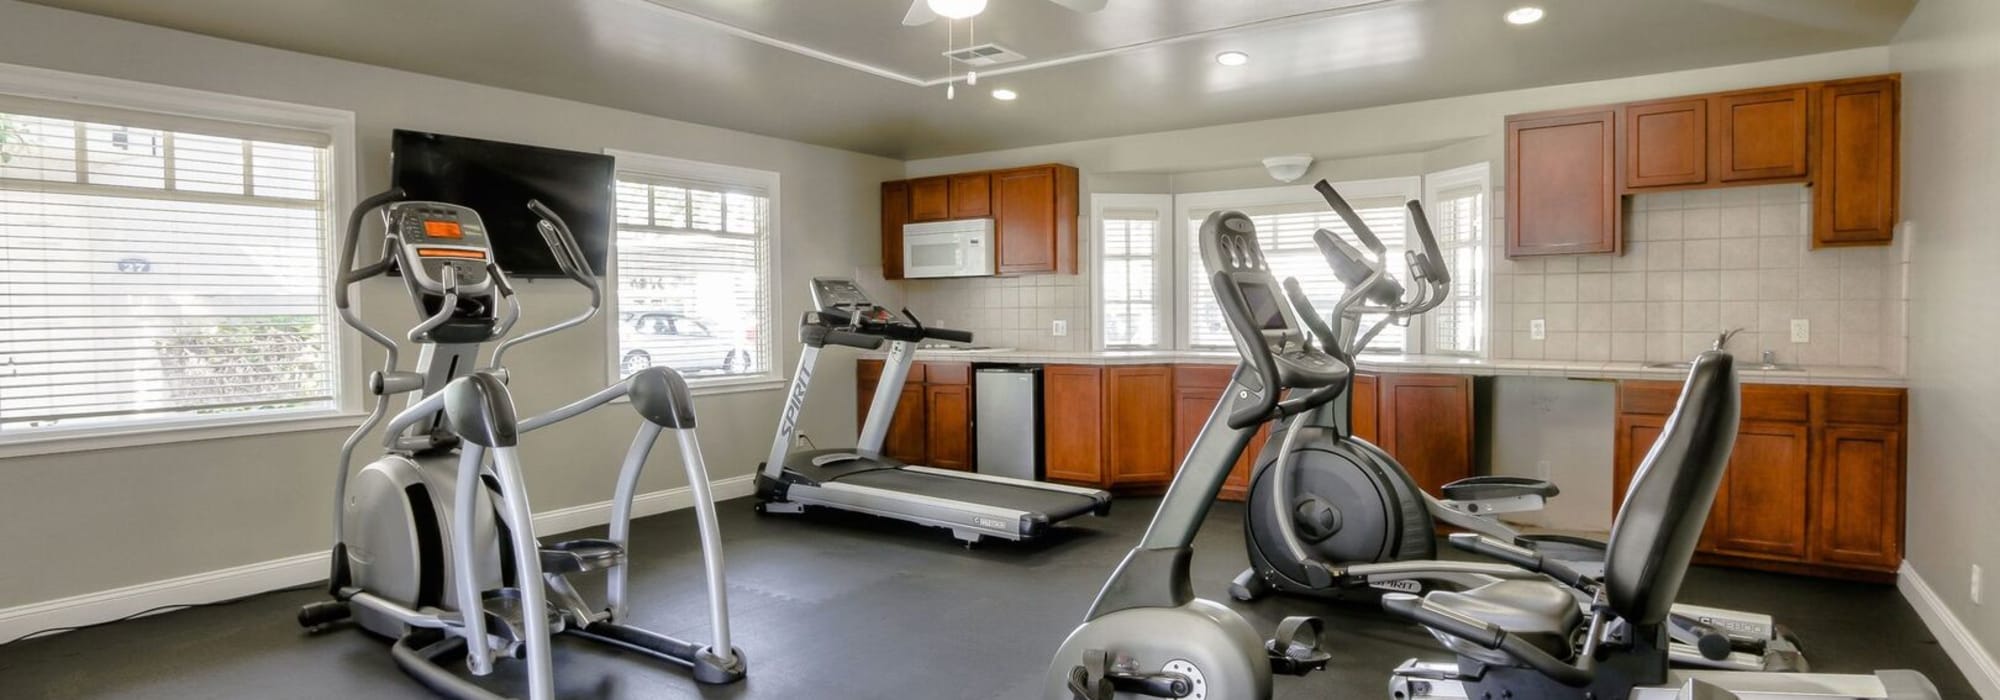 Workout machines in the fitness center at Park Sorrento in Bakersfield, California